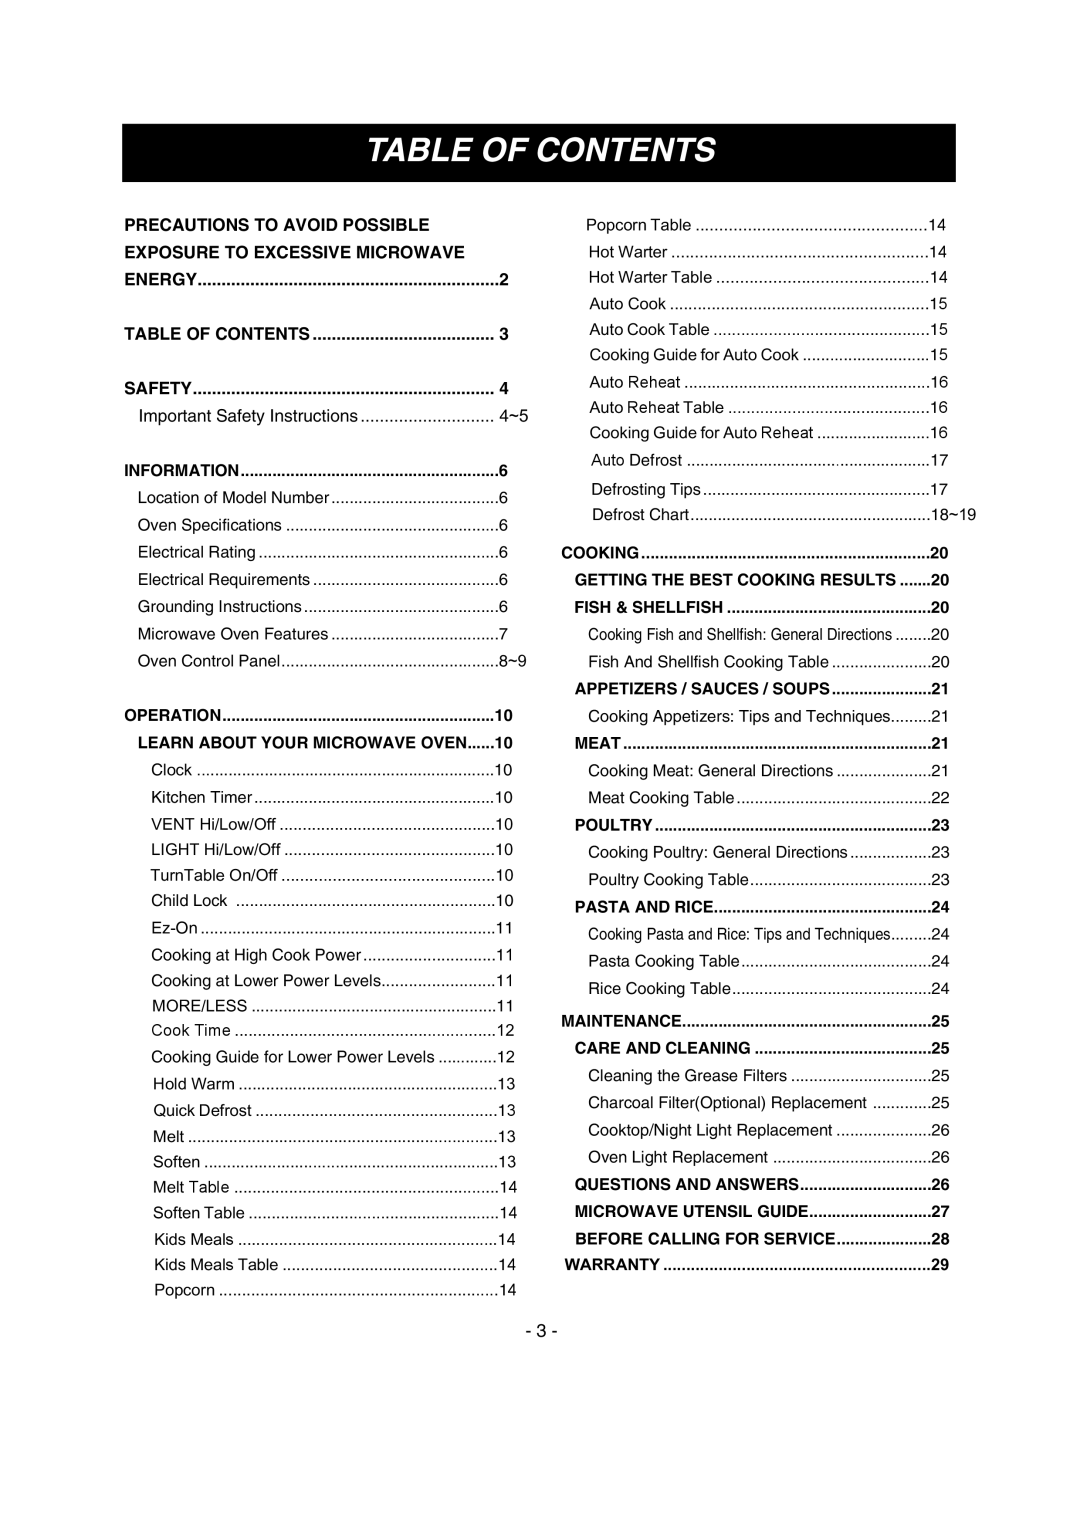 LG Electronics LMV1680WW Table Of Contents, Precautions To Avoid Possible, Exposure To Excessive Microwave, Warranty 